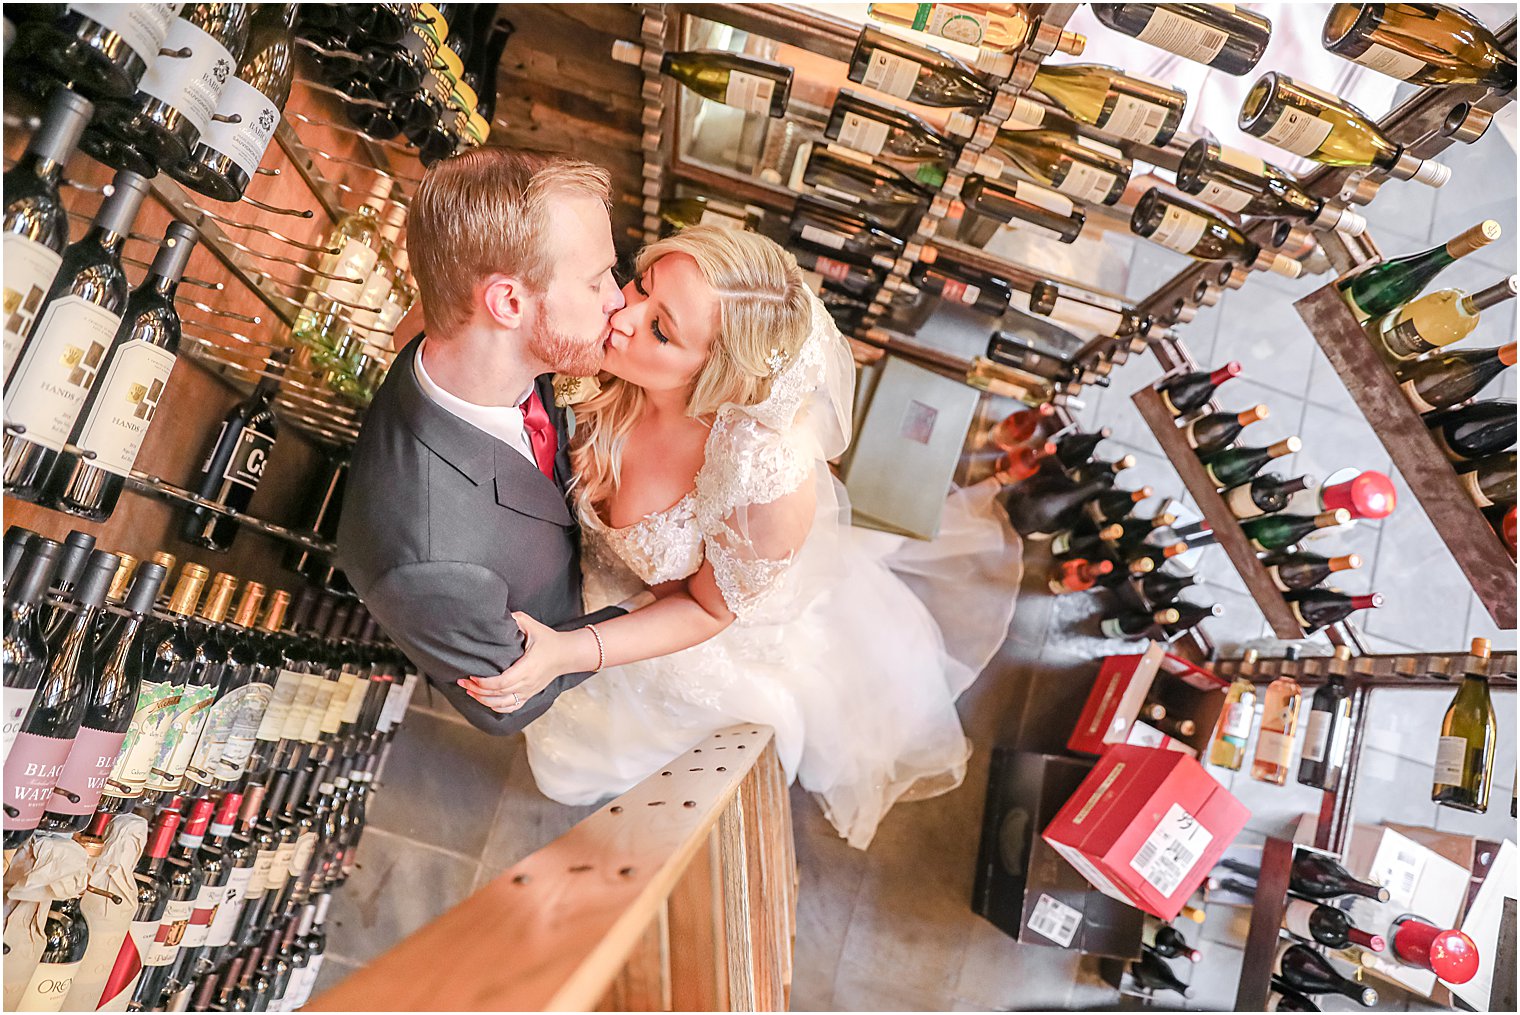 bride and groom kiss in wine cellar